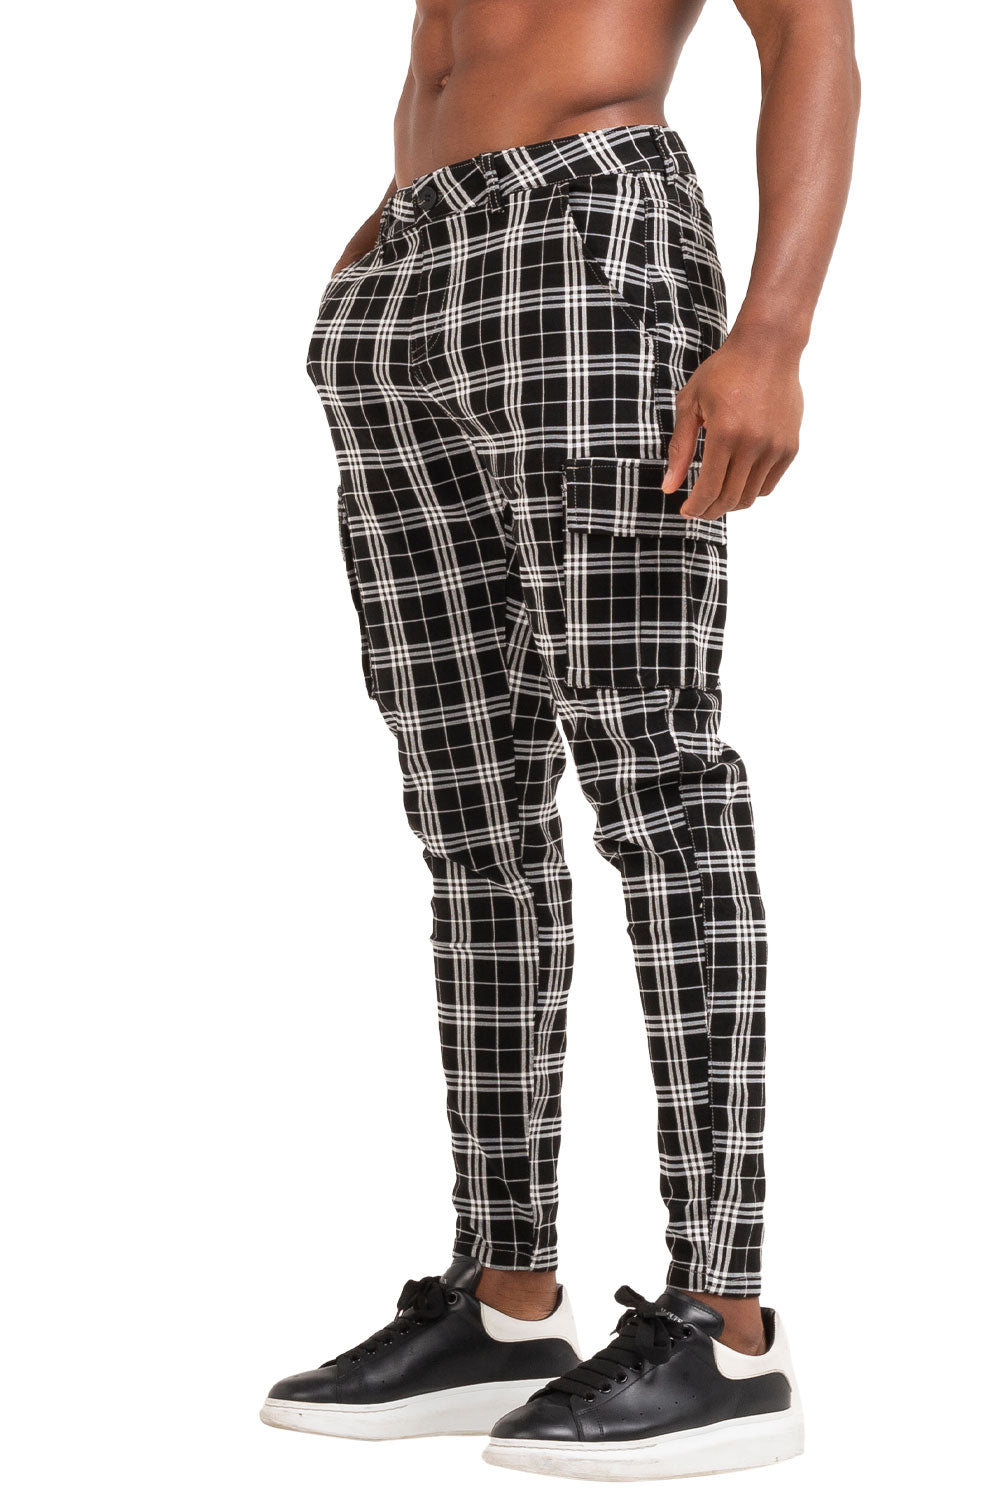 black and white checkered trousers